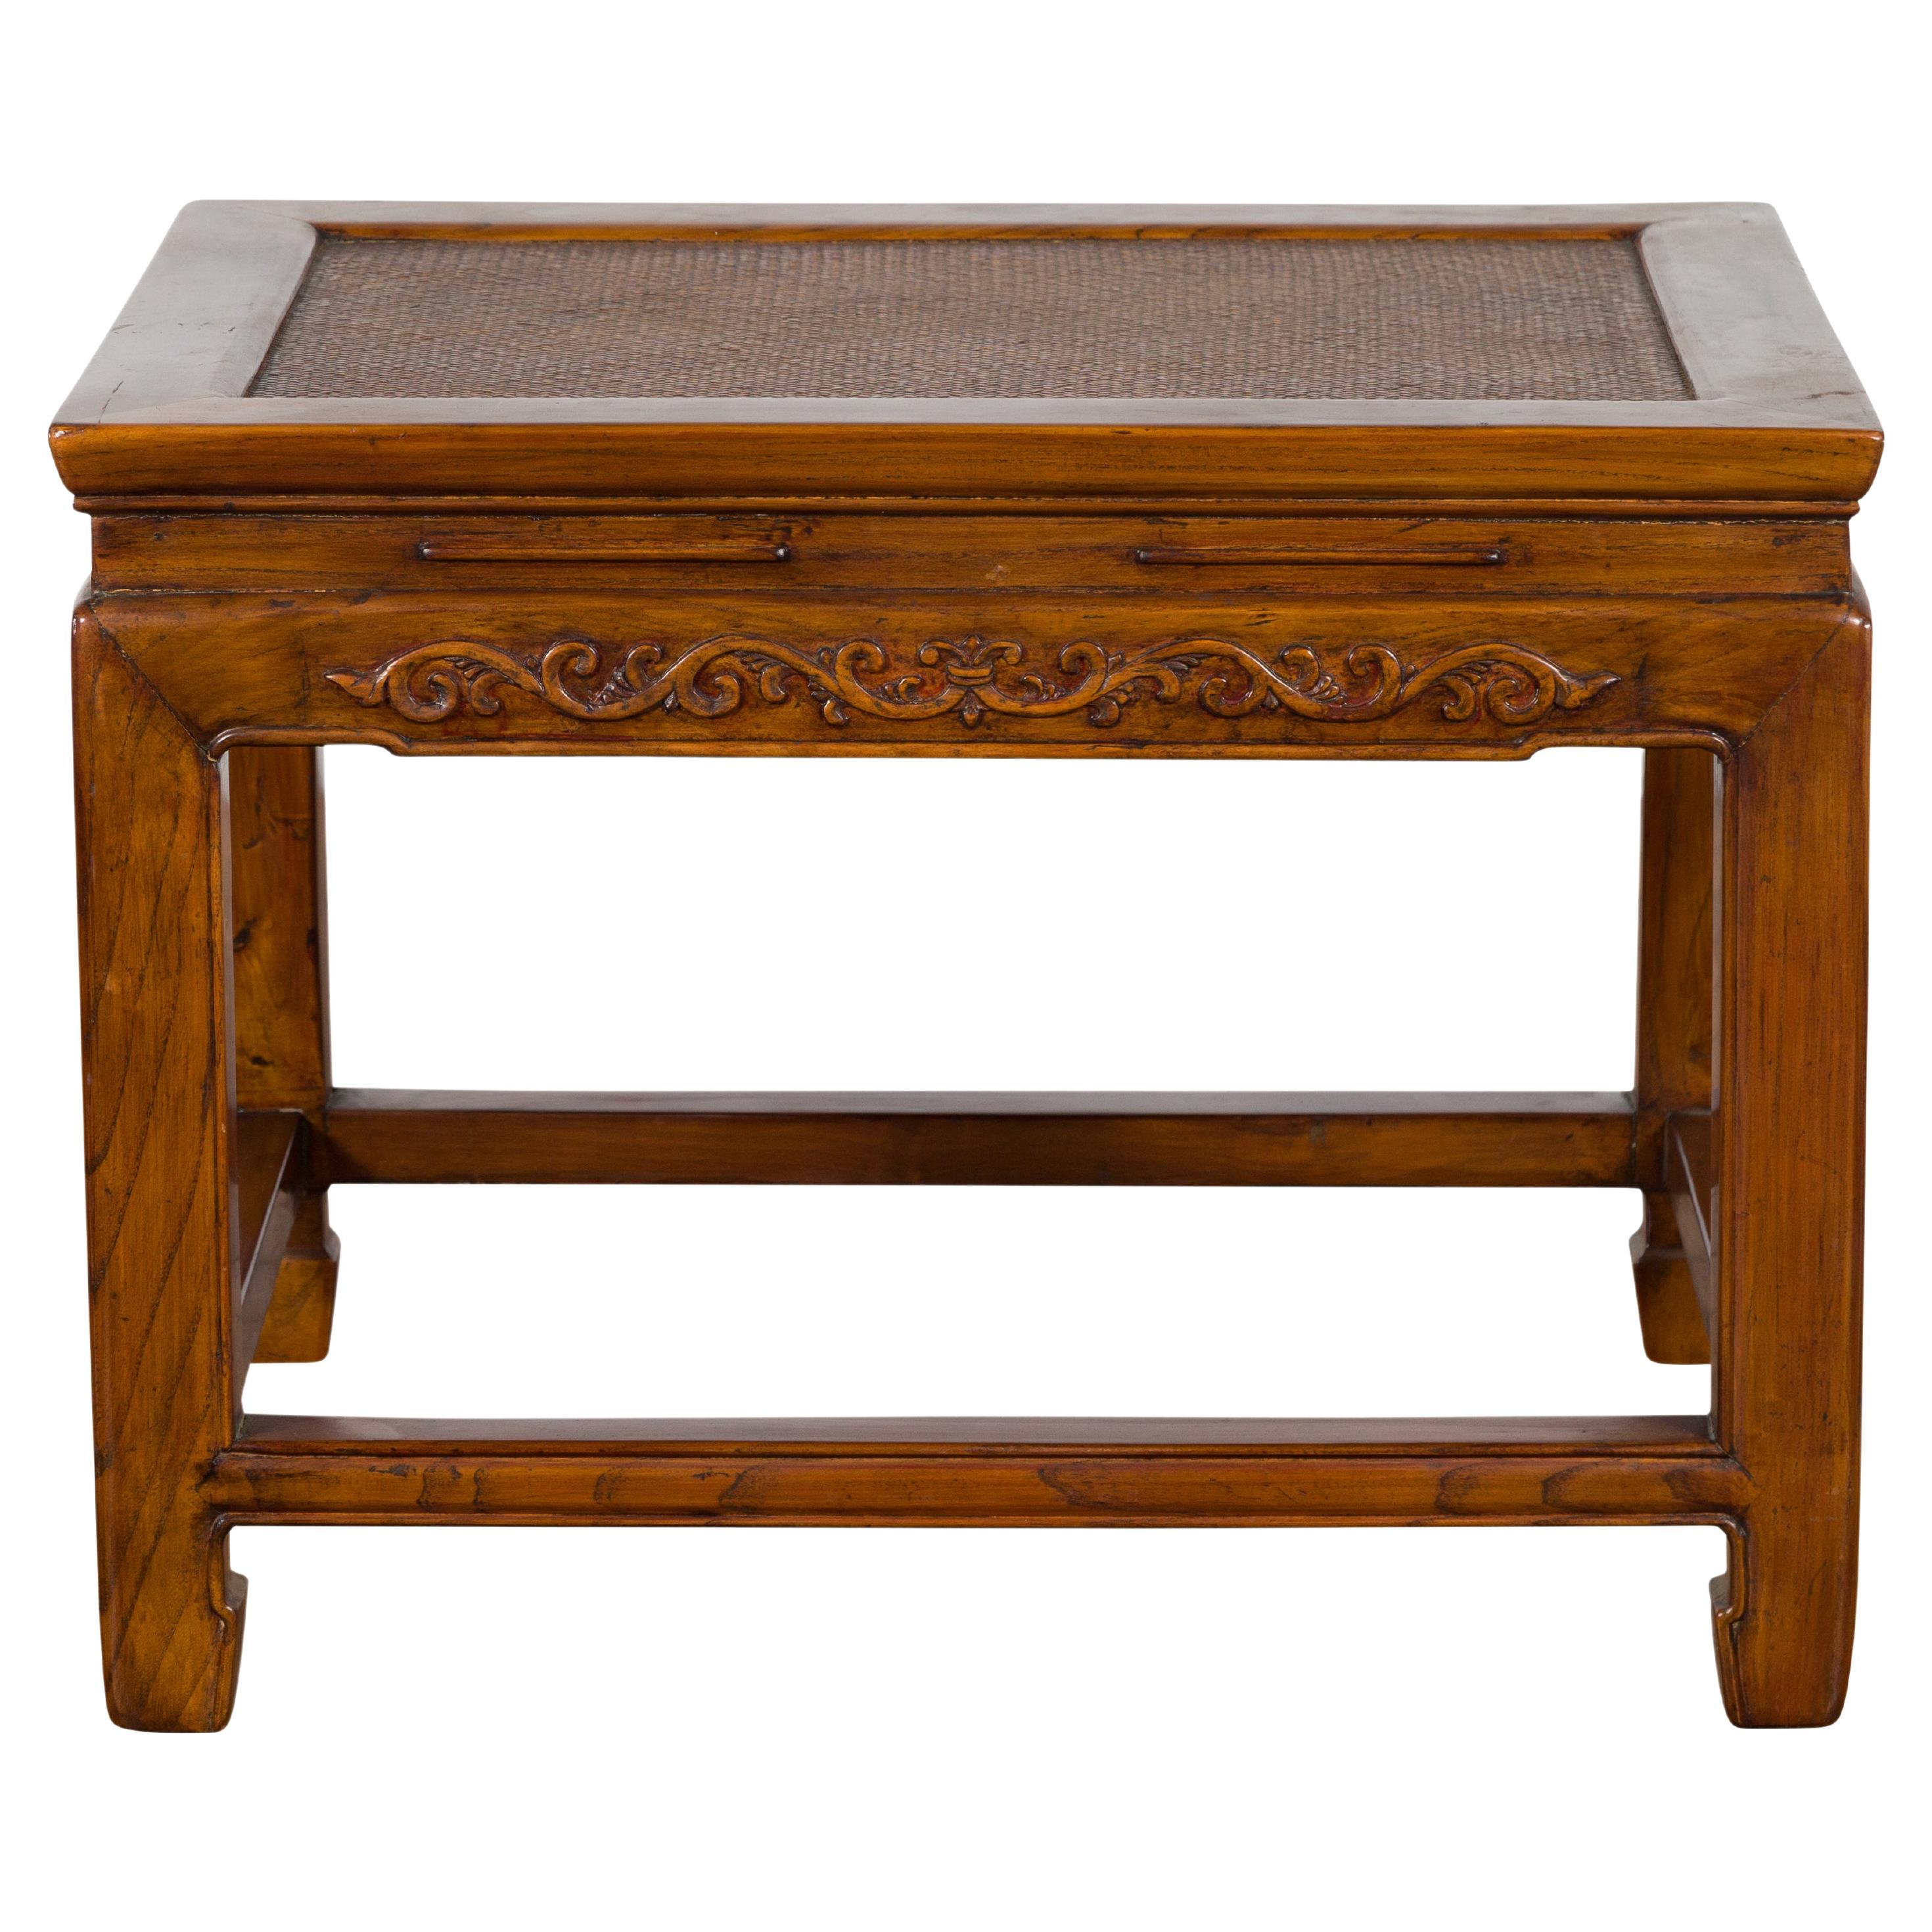 Chinese Late Qing Dynasty Elmwood Side Table with Low-Relief Carved Frieze